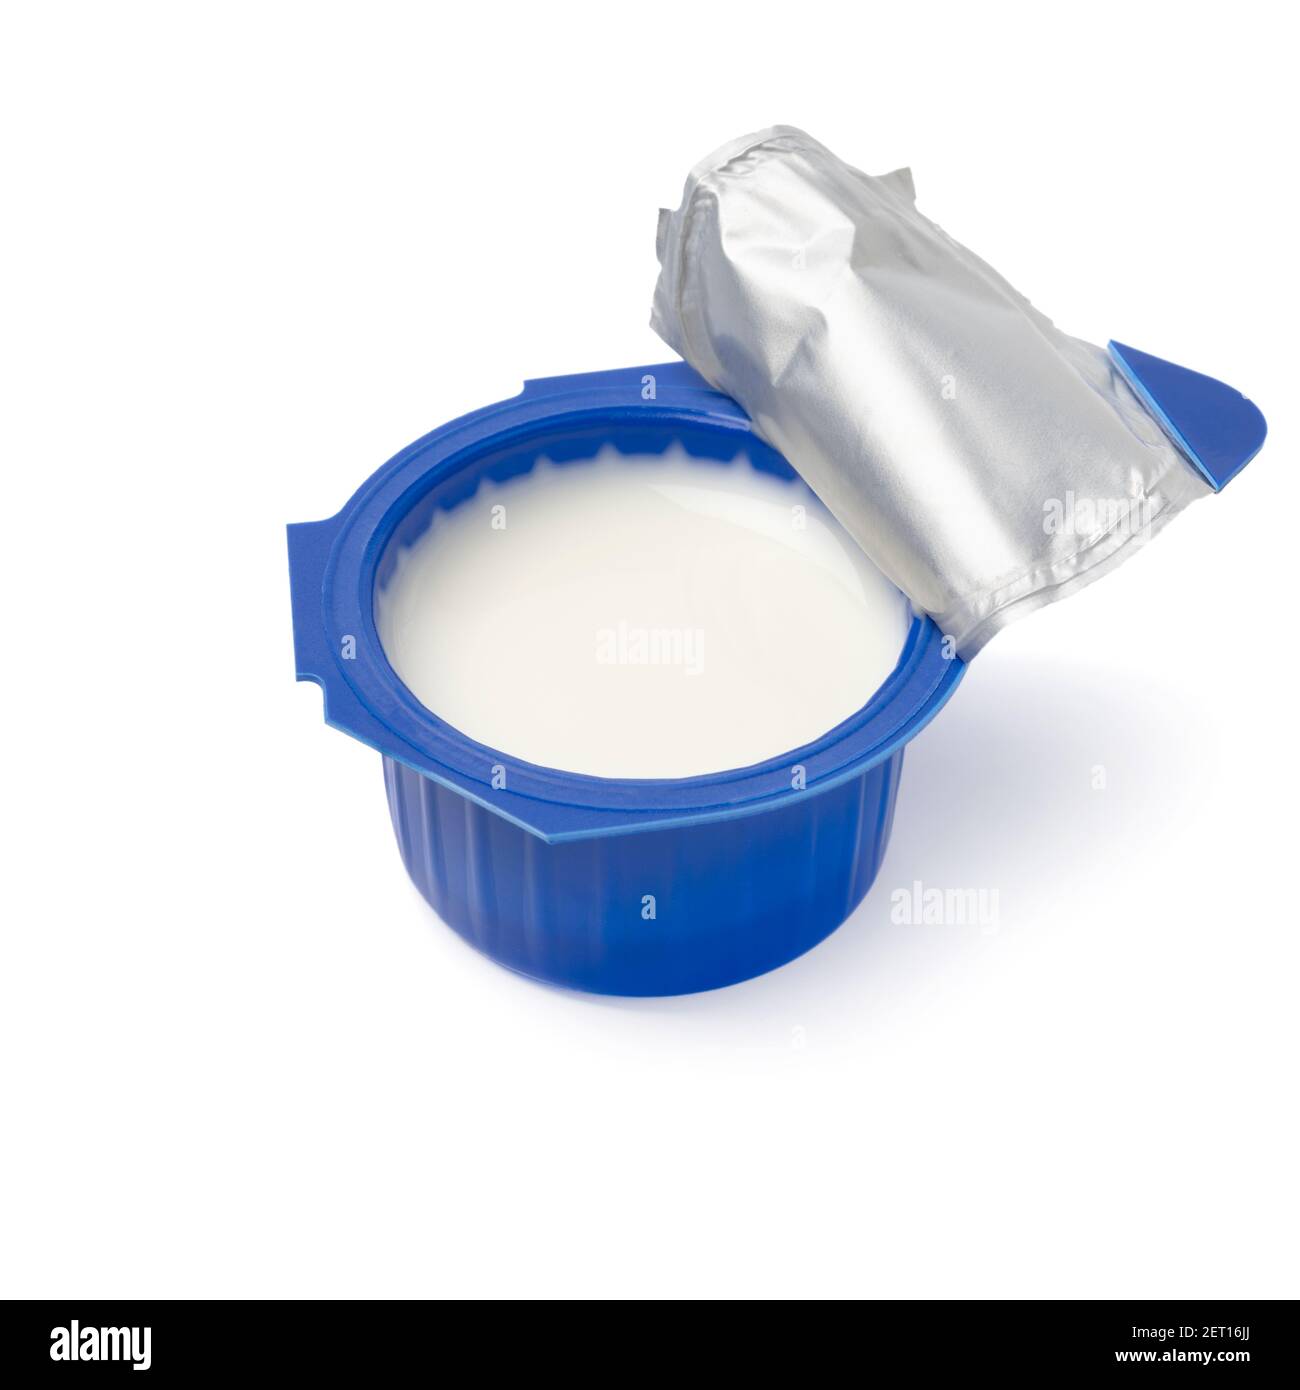 https://c8.alamy.com/comp/2ET16JJ/single-open-blue-plastic-cup-of-coffee-creamer-close-up-isolated-on-white-background-2ET16JJ.jpg